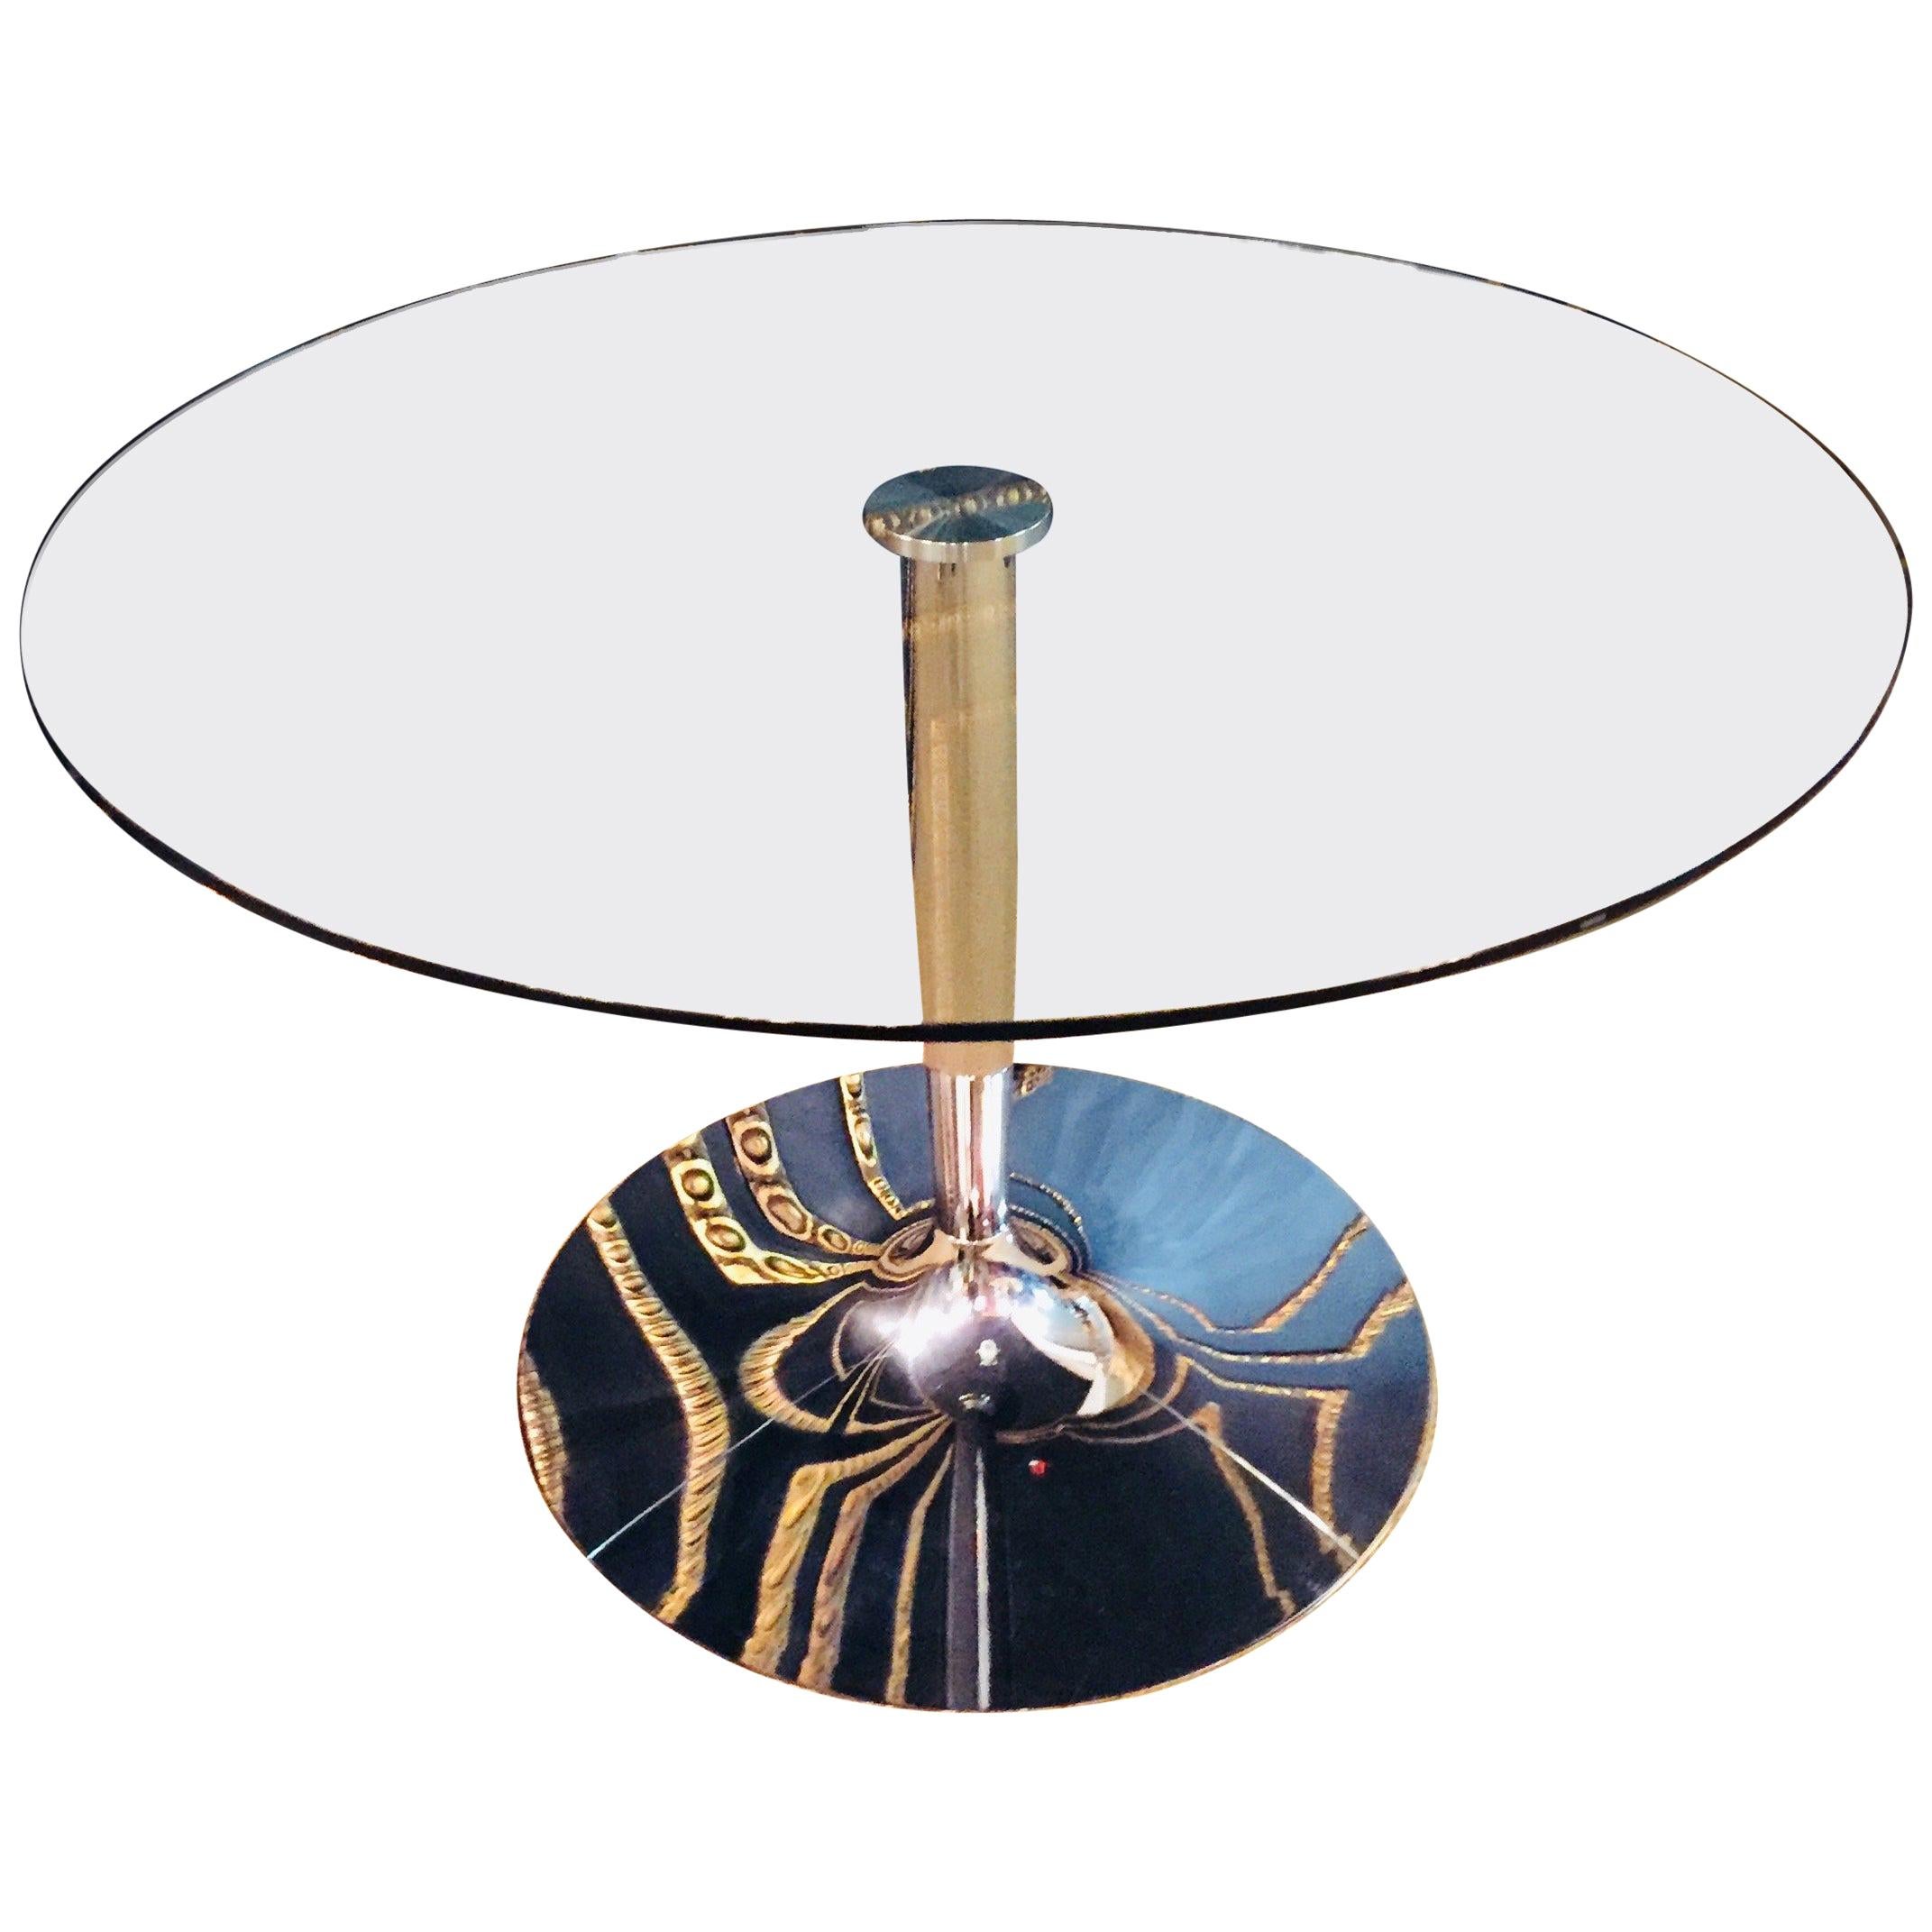 High Quality Modern Round Glass Table with Chrome Foot Brand Calligaris 